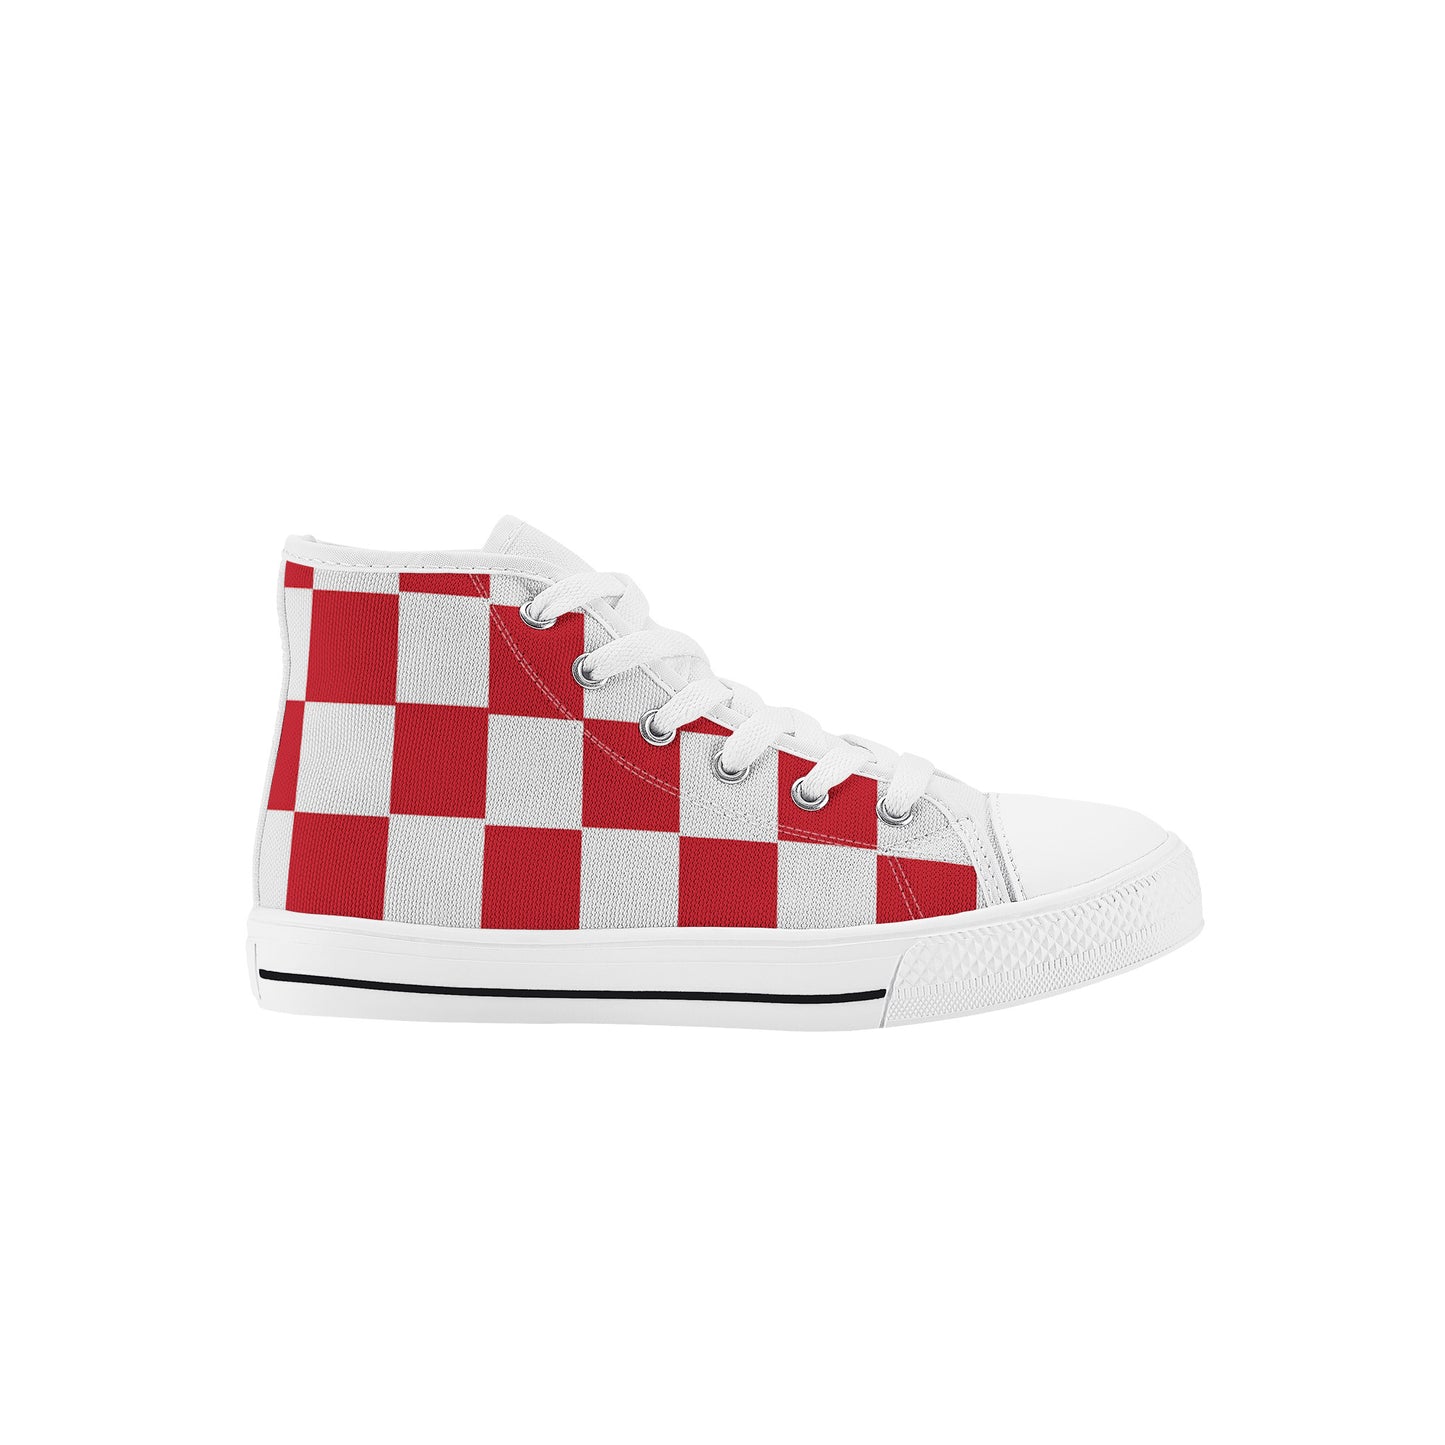 Kids High Top Sneakers - Red Checkers